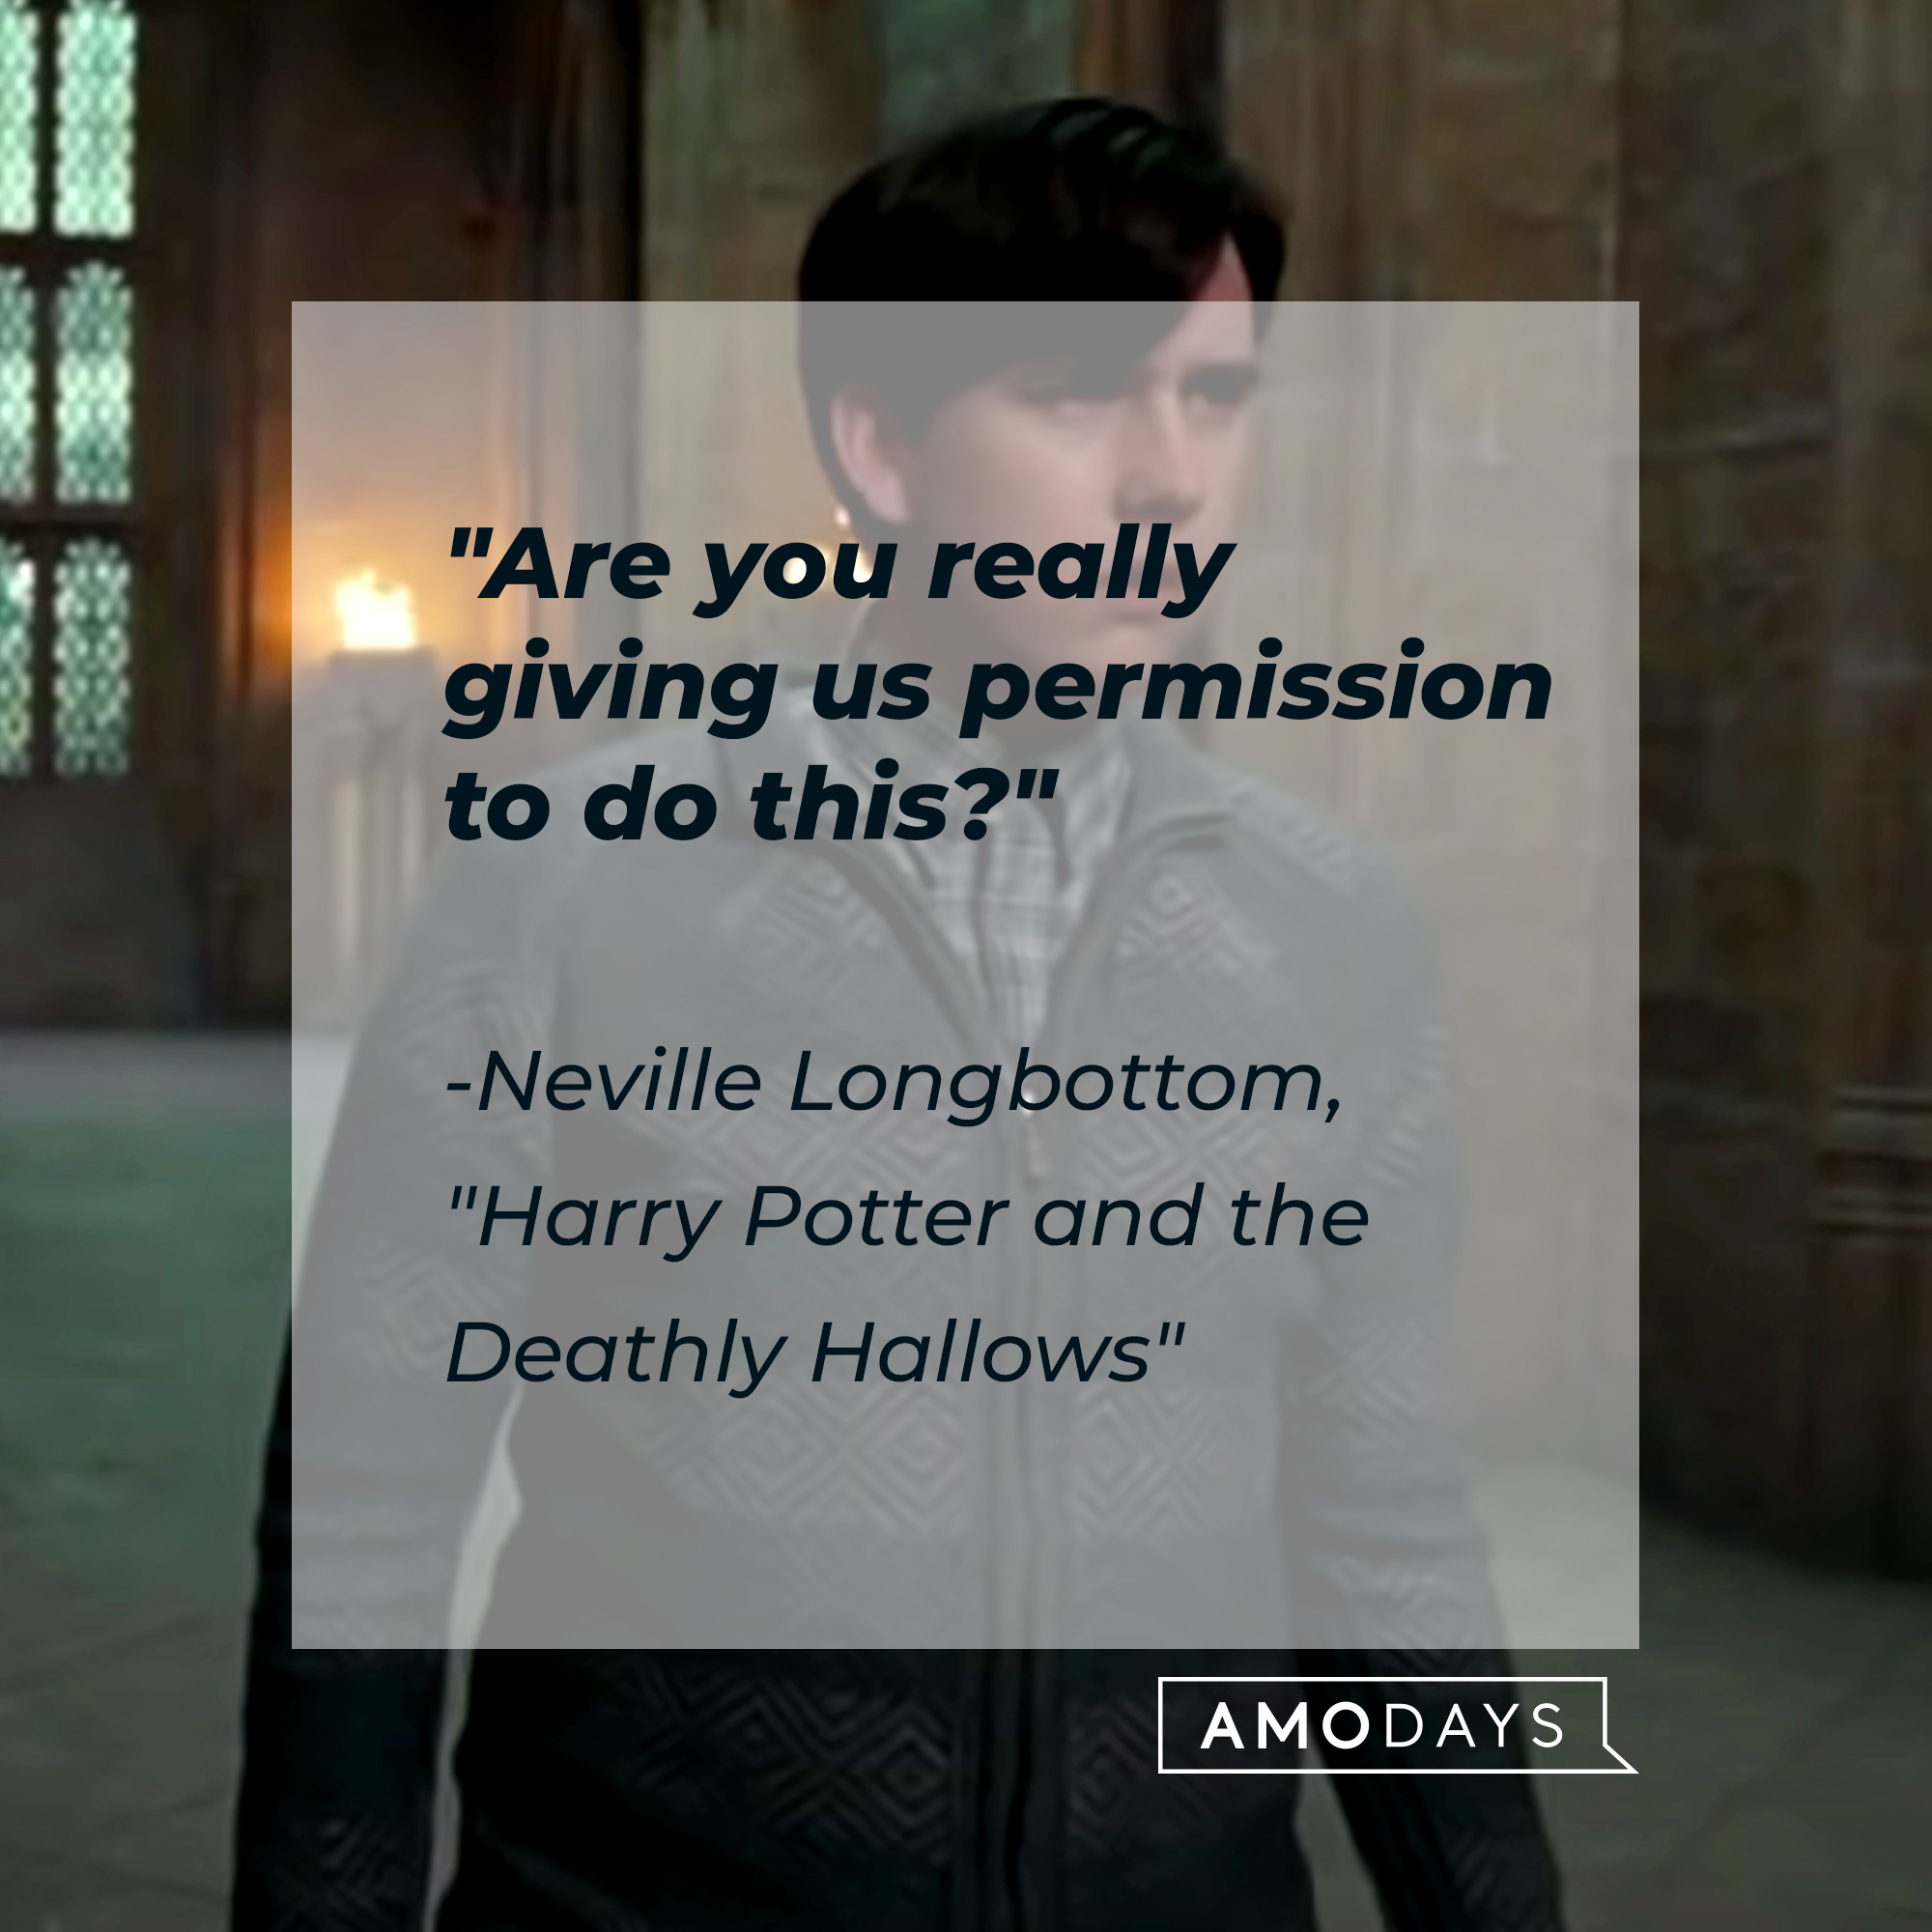 Neville Longbottom with his quote: "Are you really giving us permission to do this? | Source: Facebook.com/harrypotter